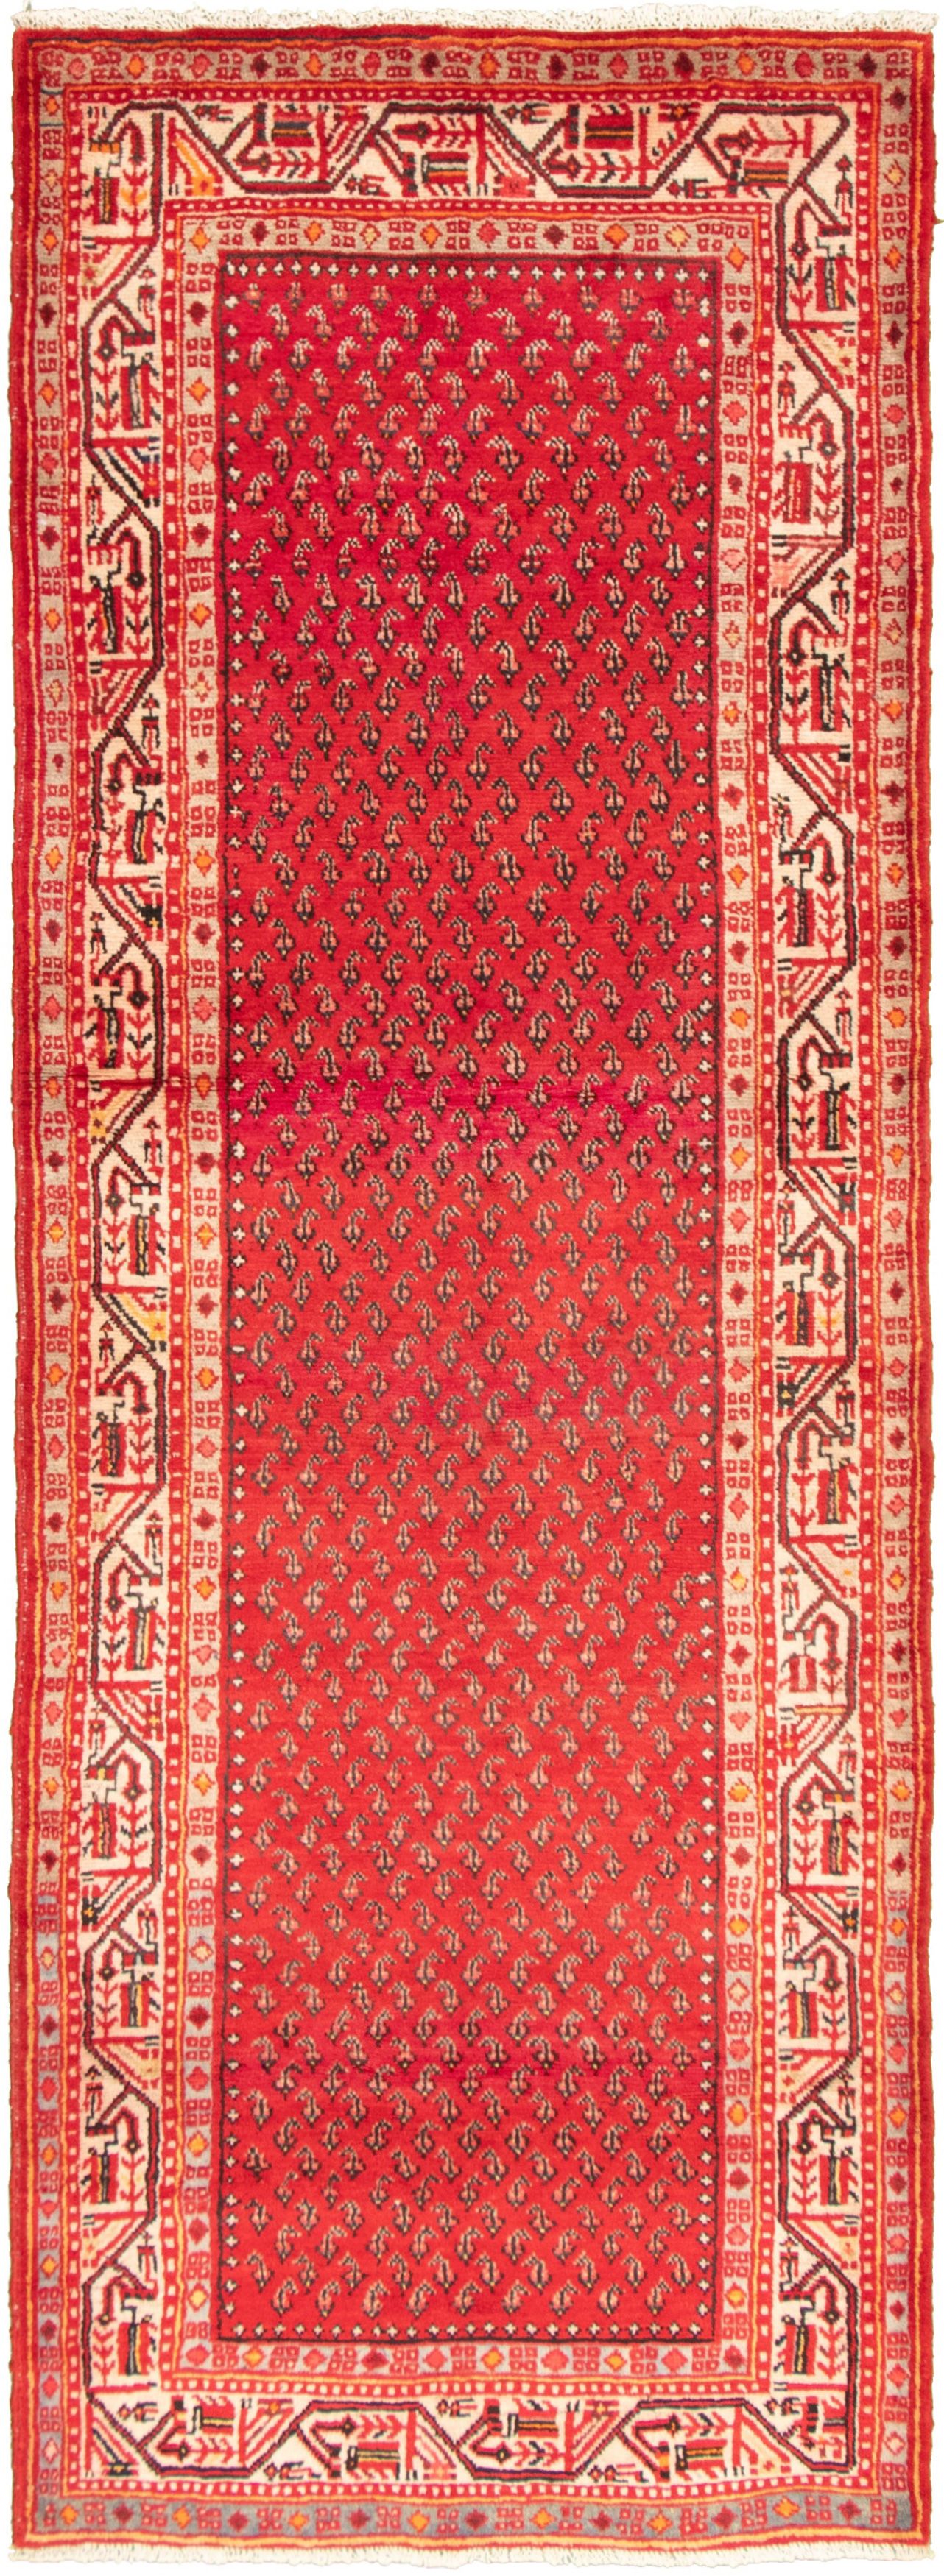 Hand-knotted Royal Mahal Red Wool Rug 3'6" x 10'6" Size: 3'6" x 10'6"  